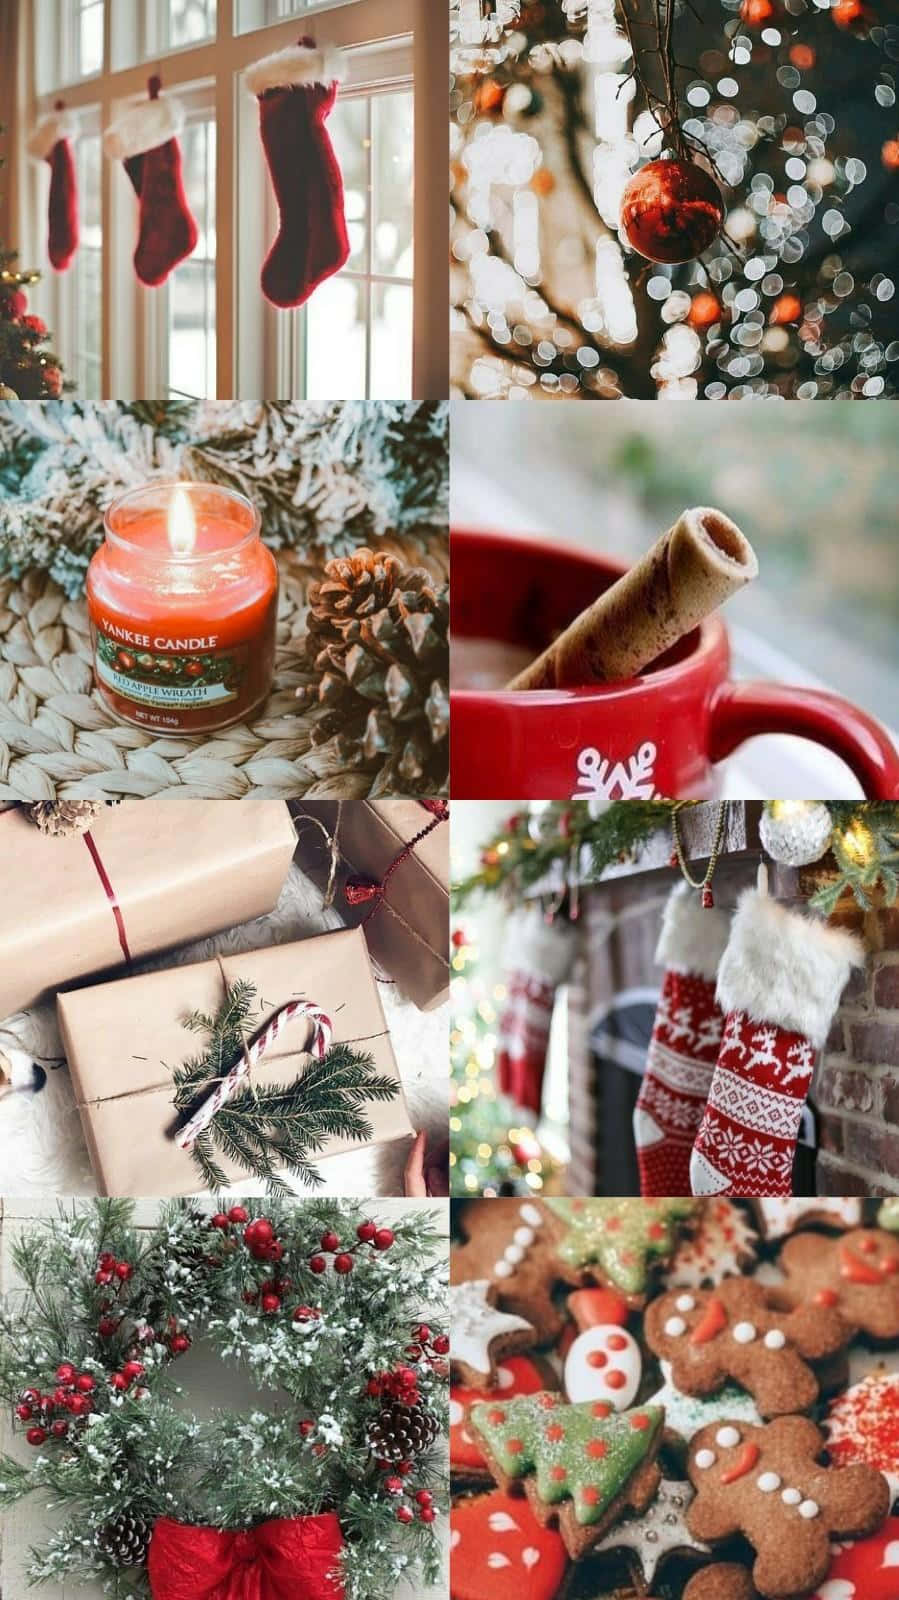 Celebrate the spirit and joy of the Christmas season with a playful and colourful Christmas aesthetic.